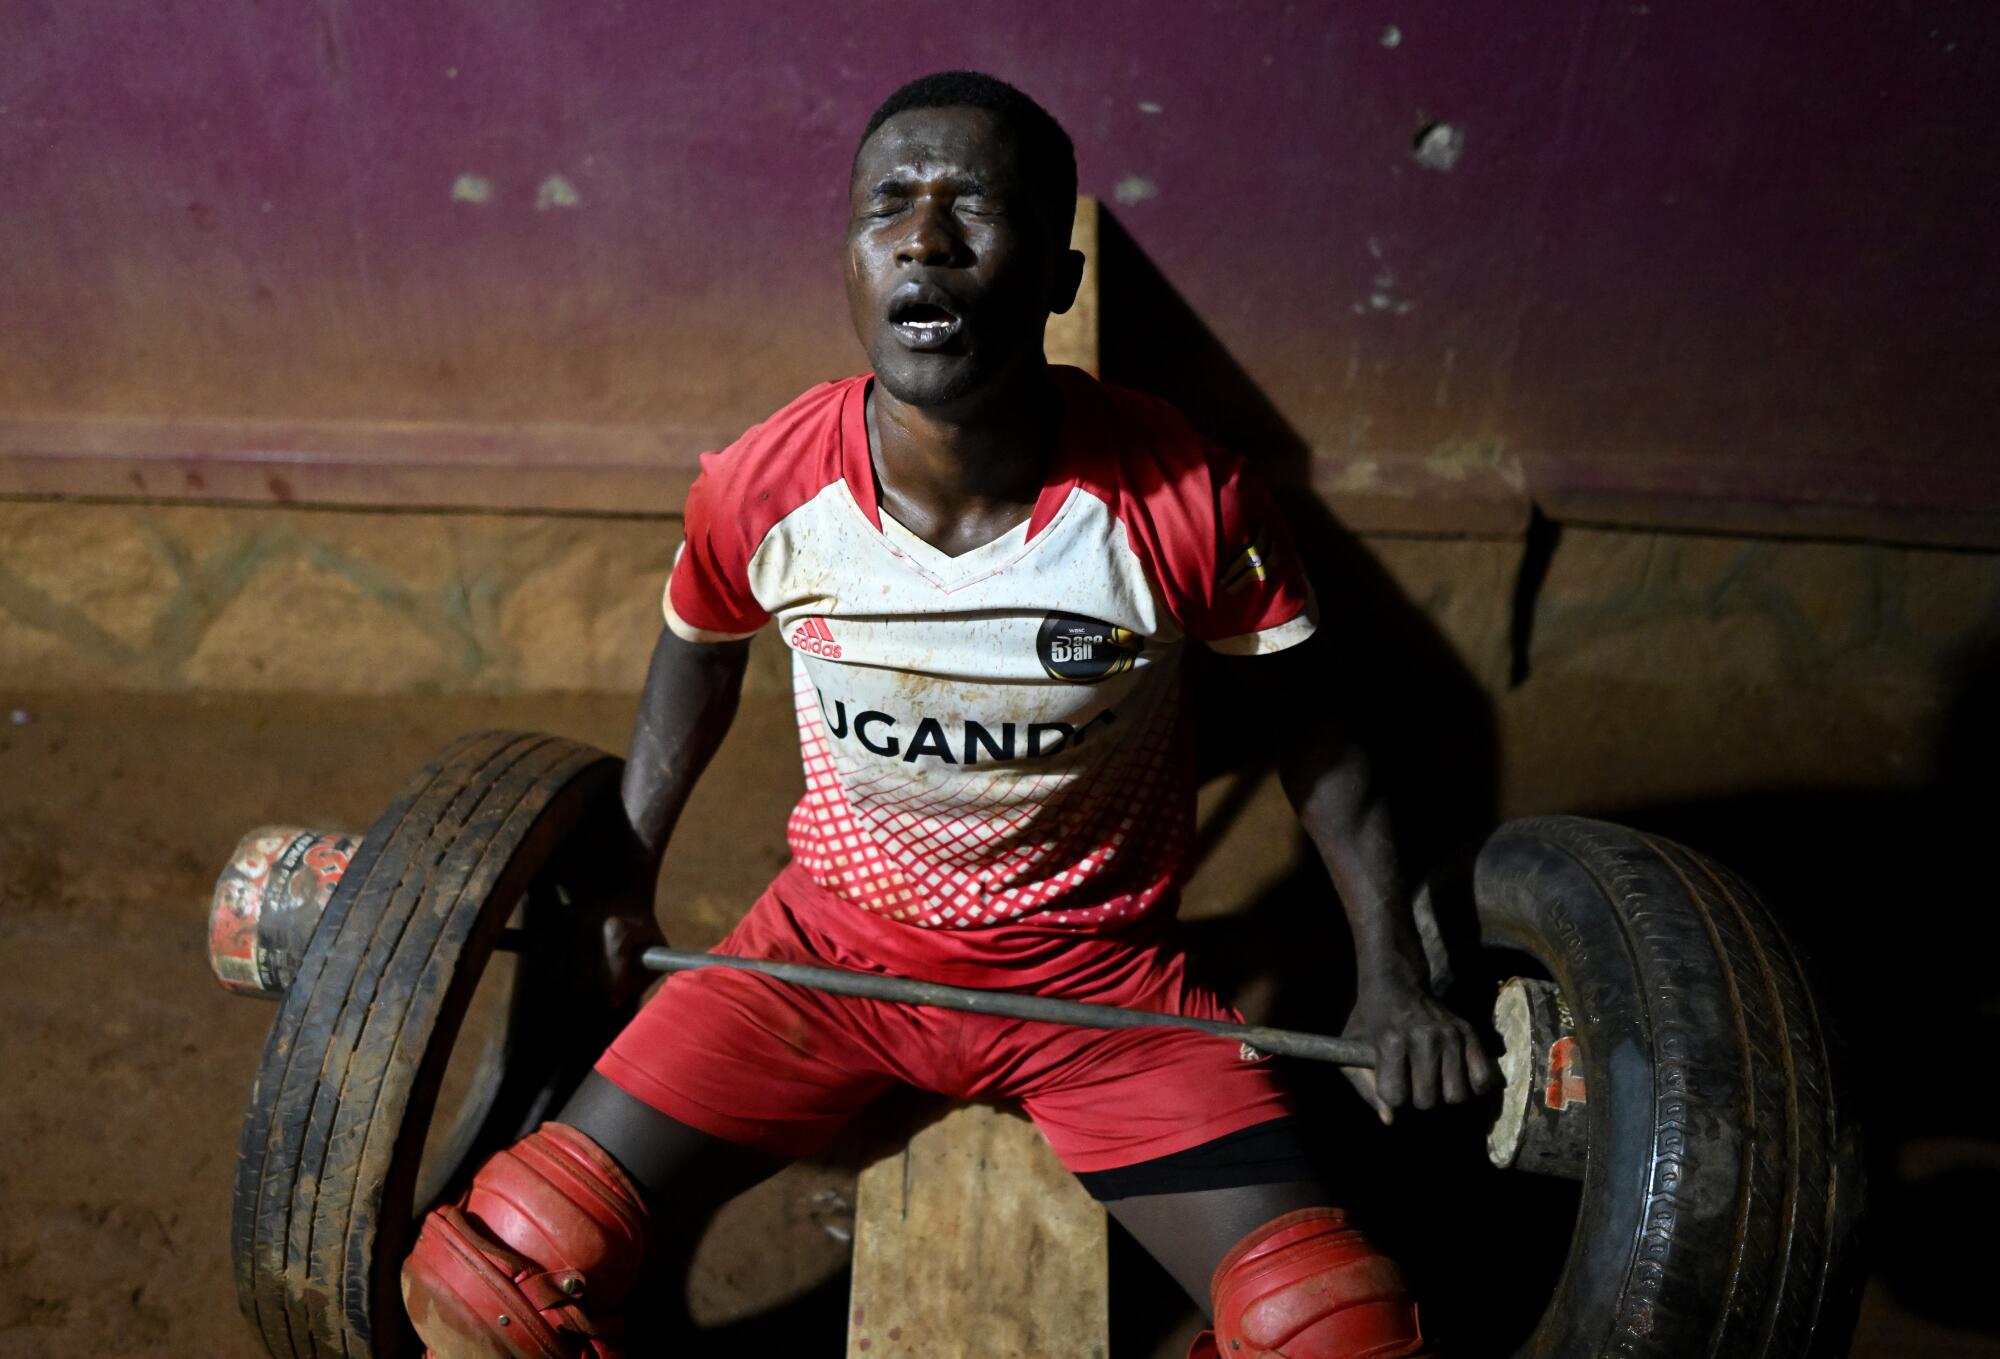 After having one meal for the day, an exhausted Dennis Kazumba works out late at night with old tires outside his home.